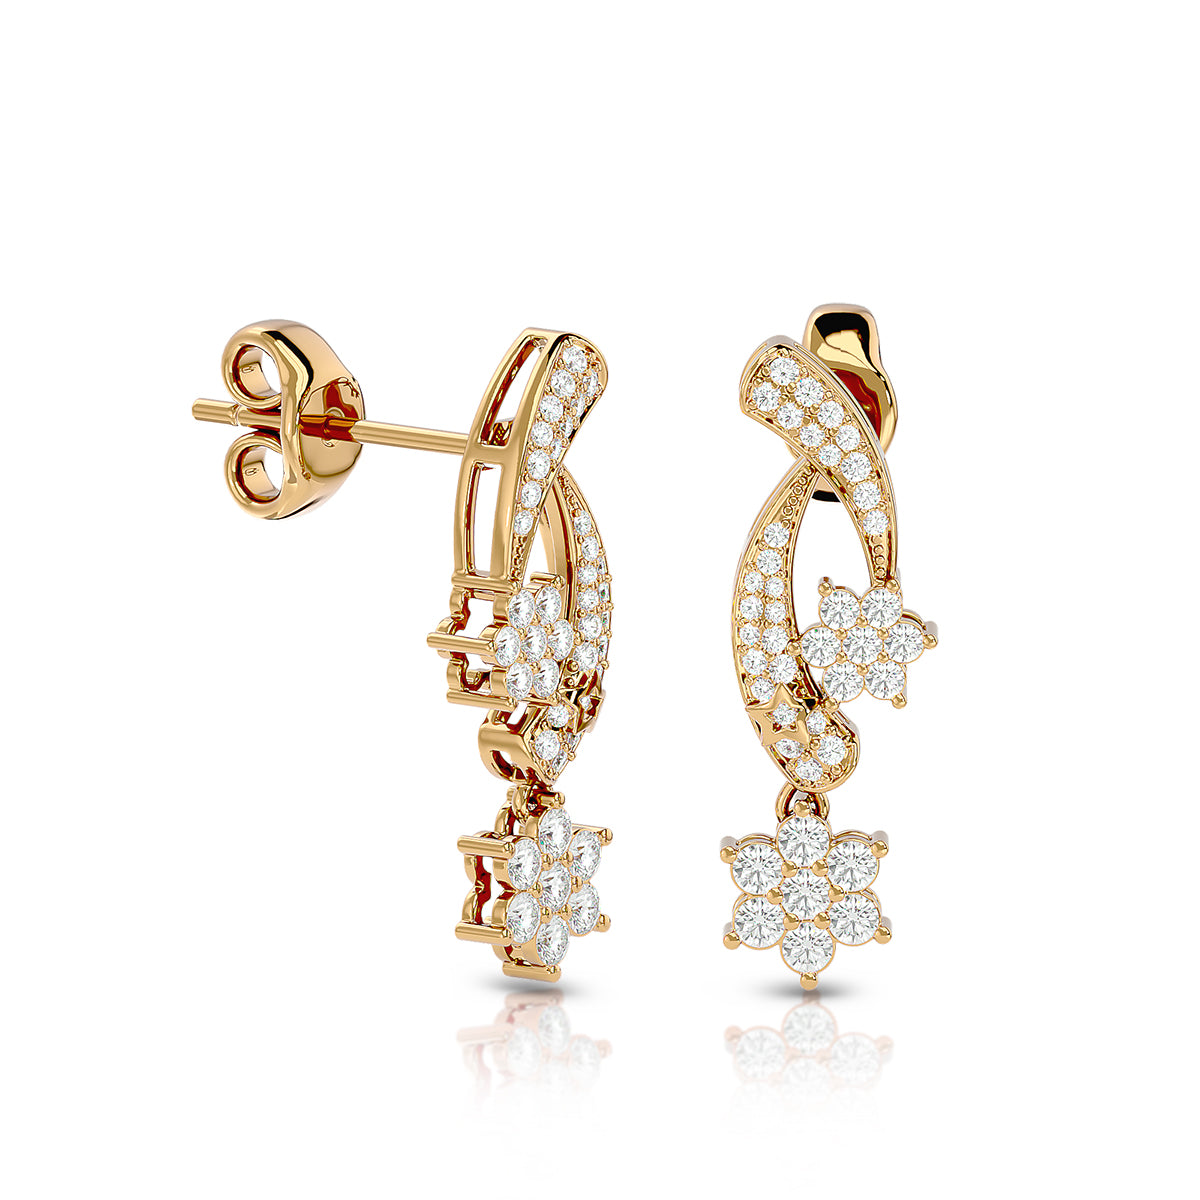 Persona Earrings 18K Gold With Diamonds